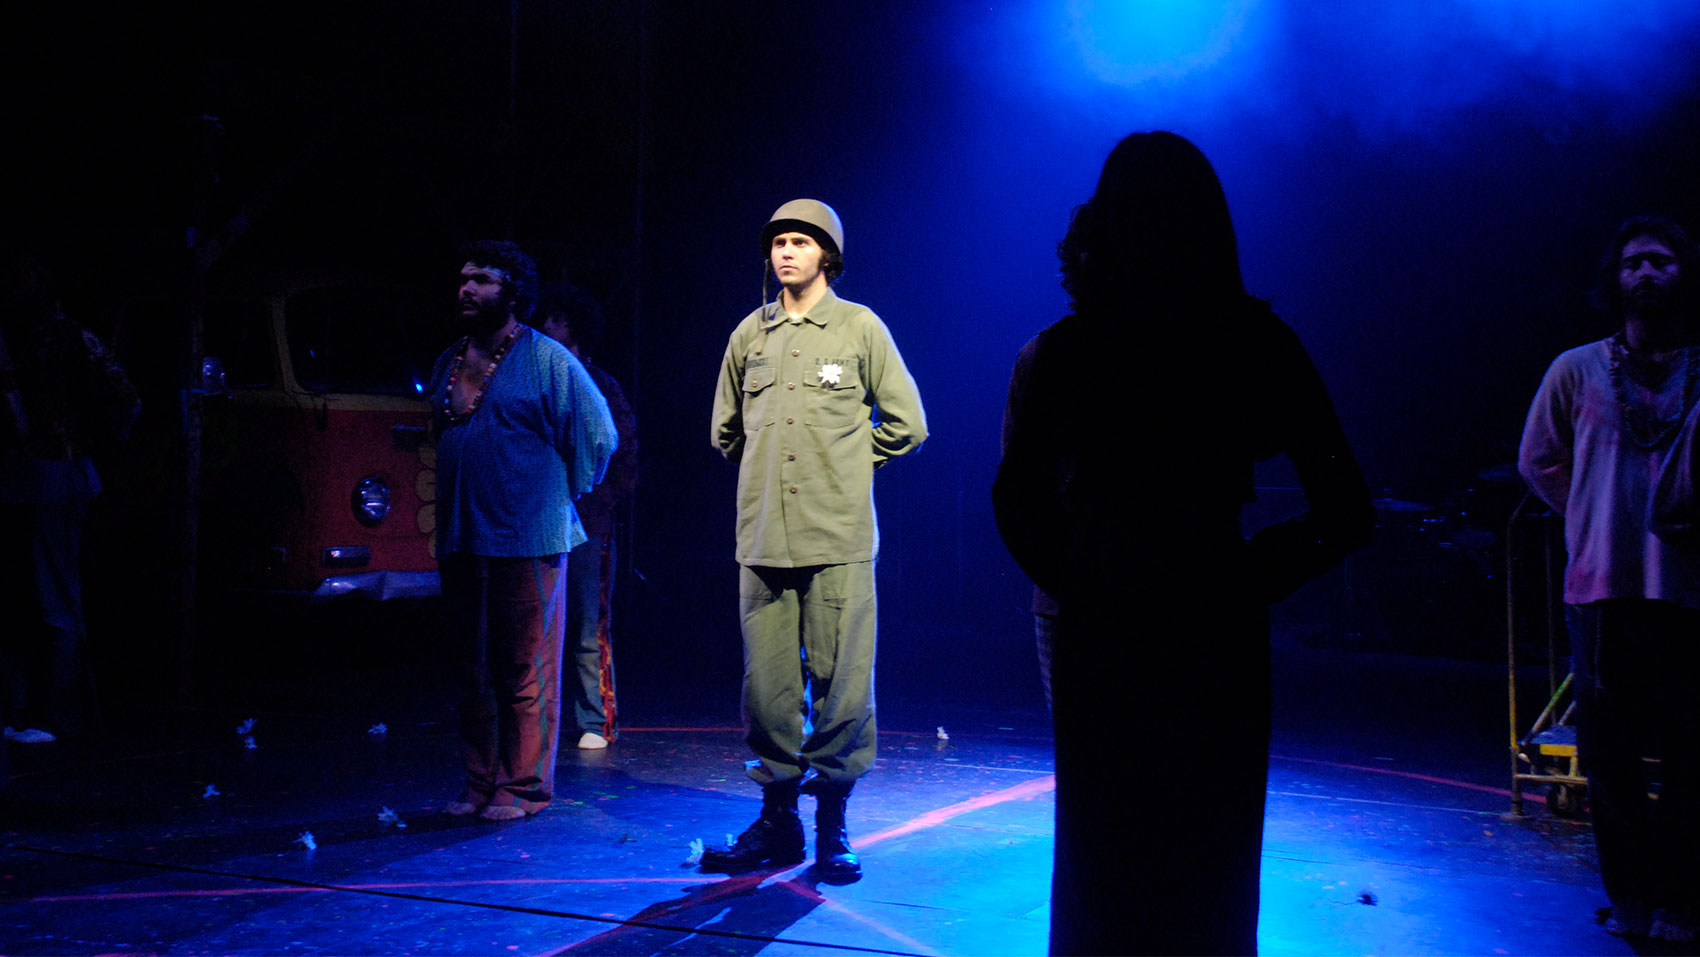 A group of characters are standing on stage, the character furthest into the foreground is silhouetted while a soldier in the mid-ground is under a bright spotlight. 